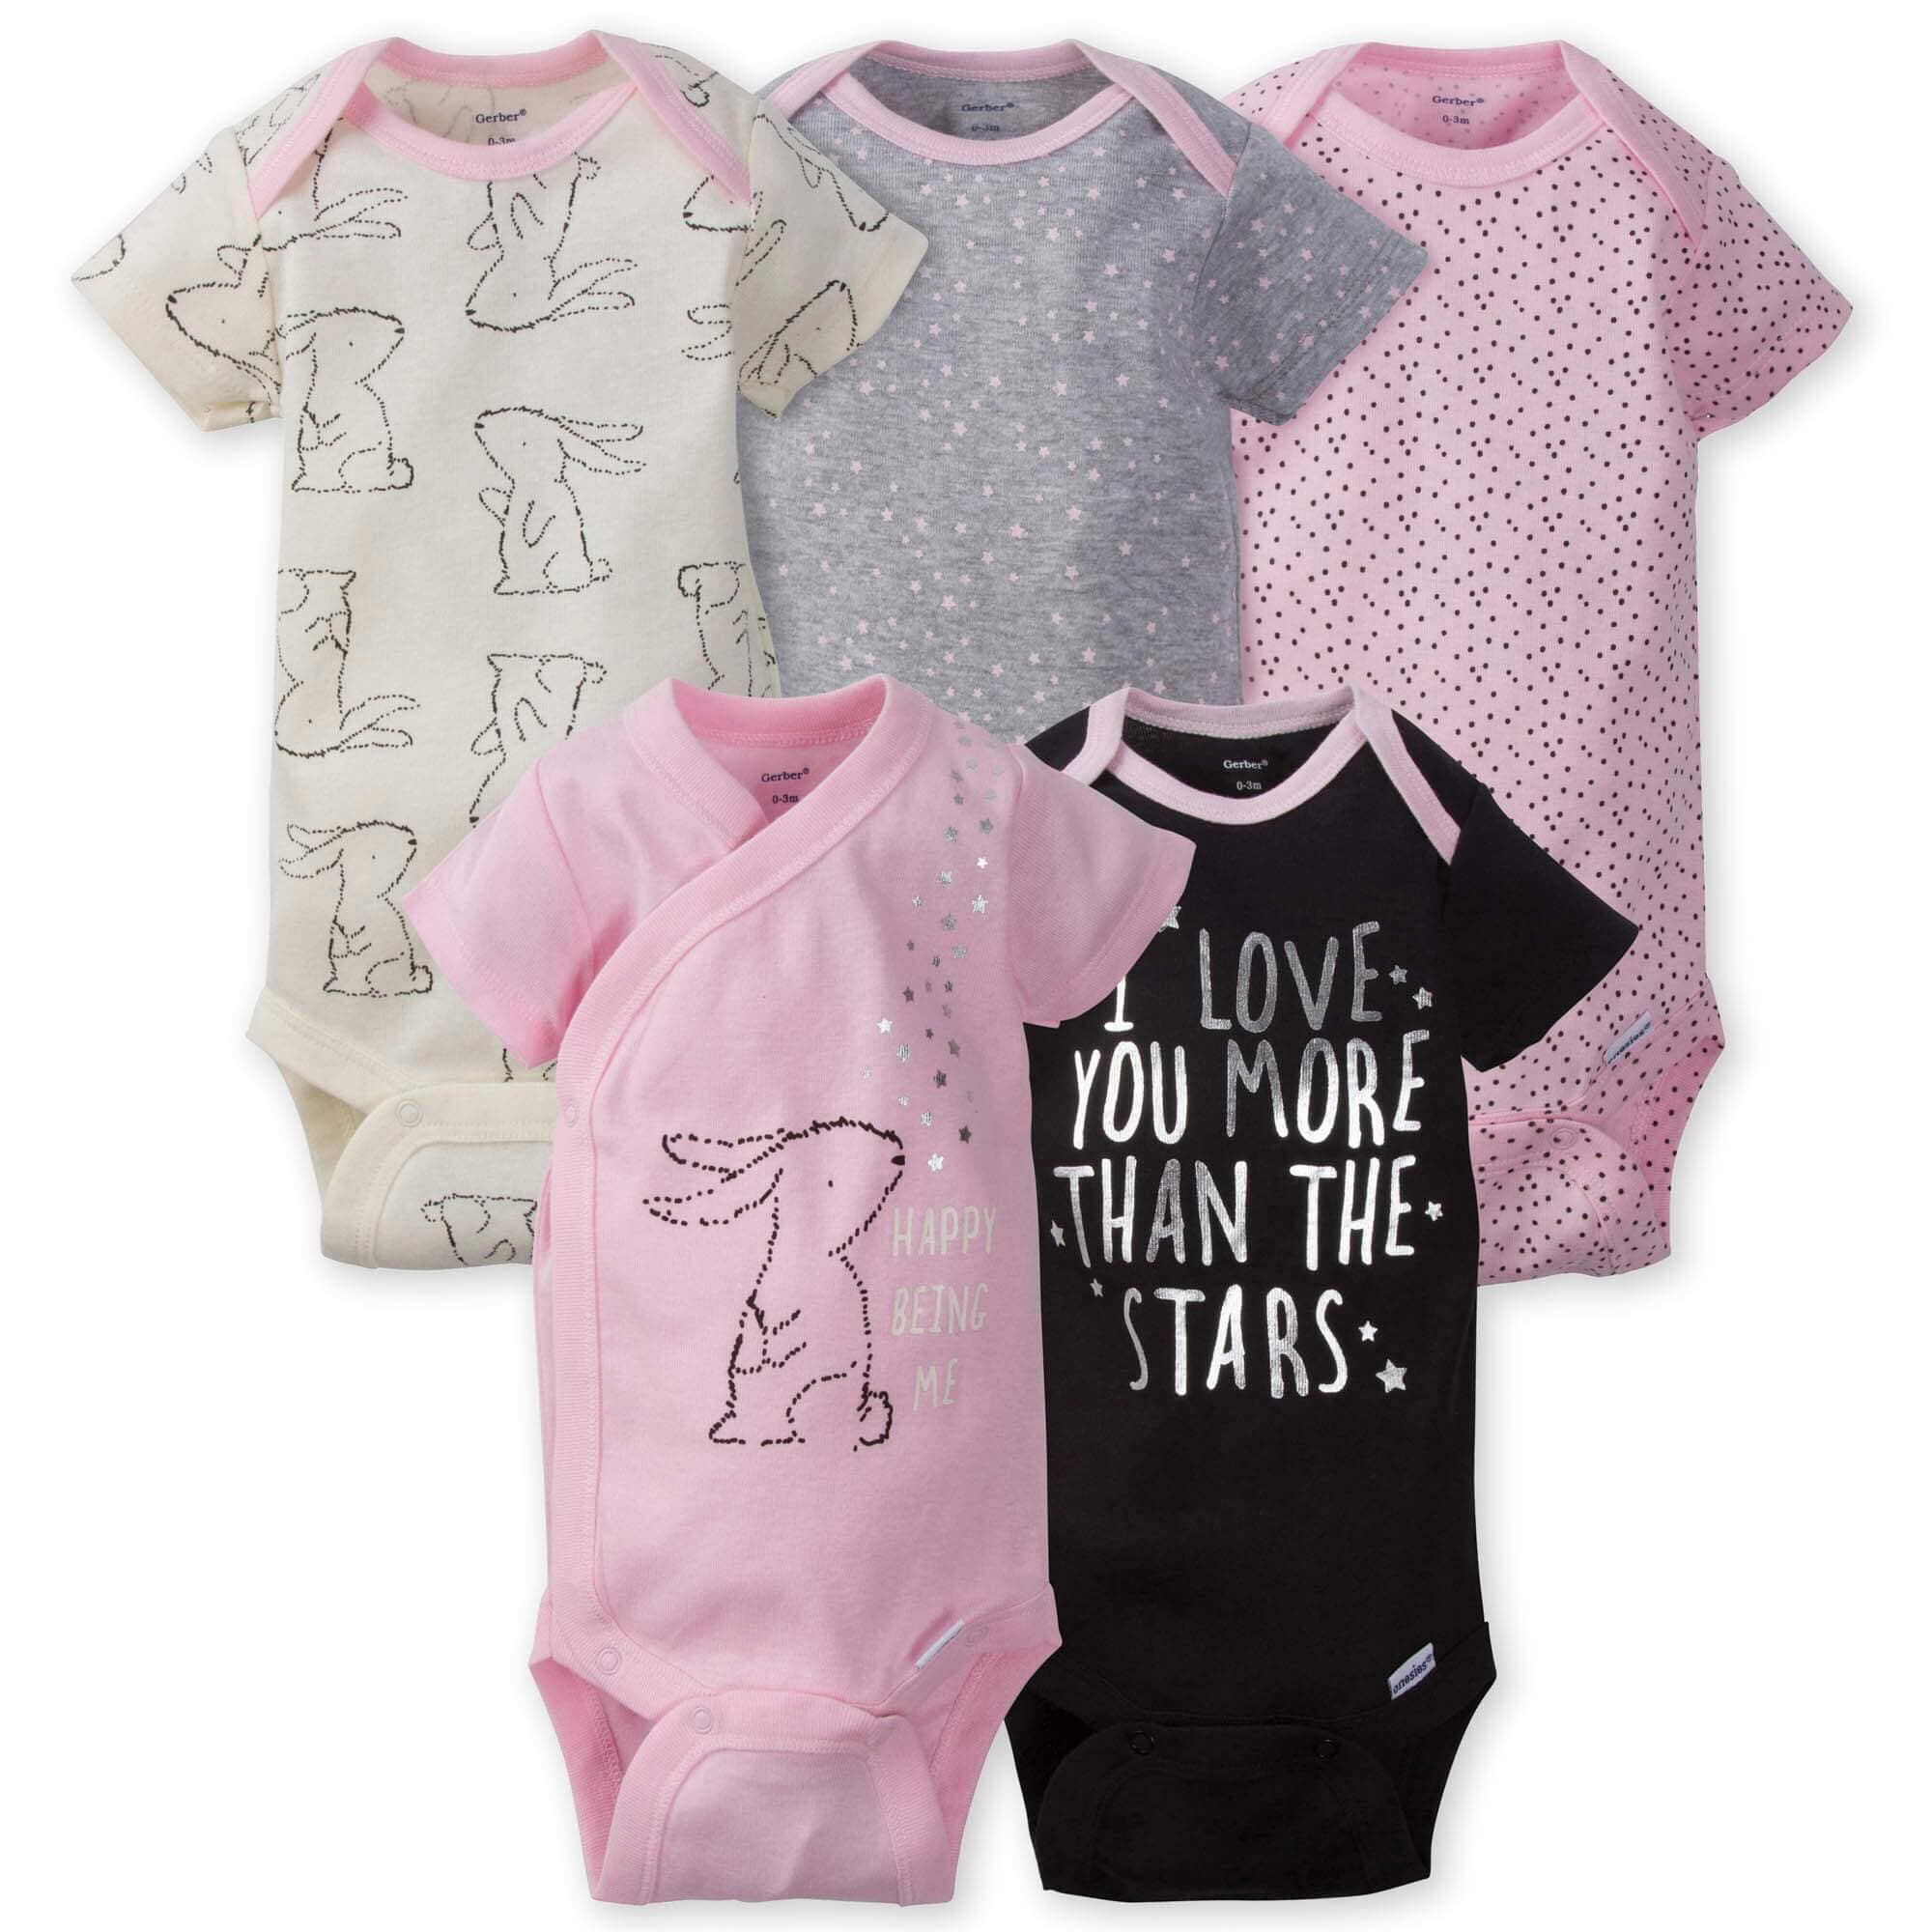 baby clothes for girls near me